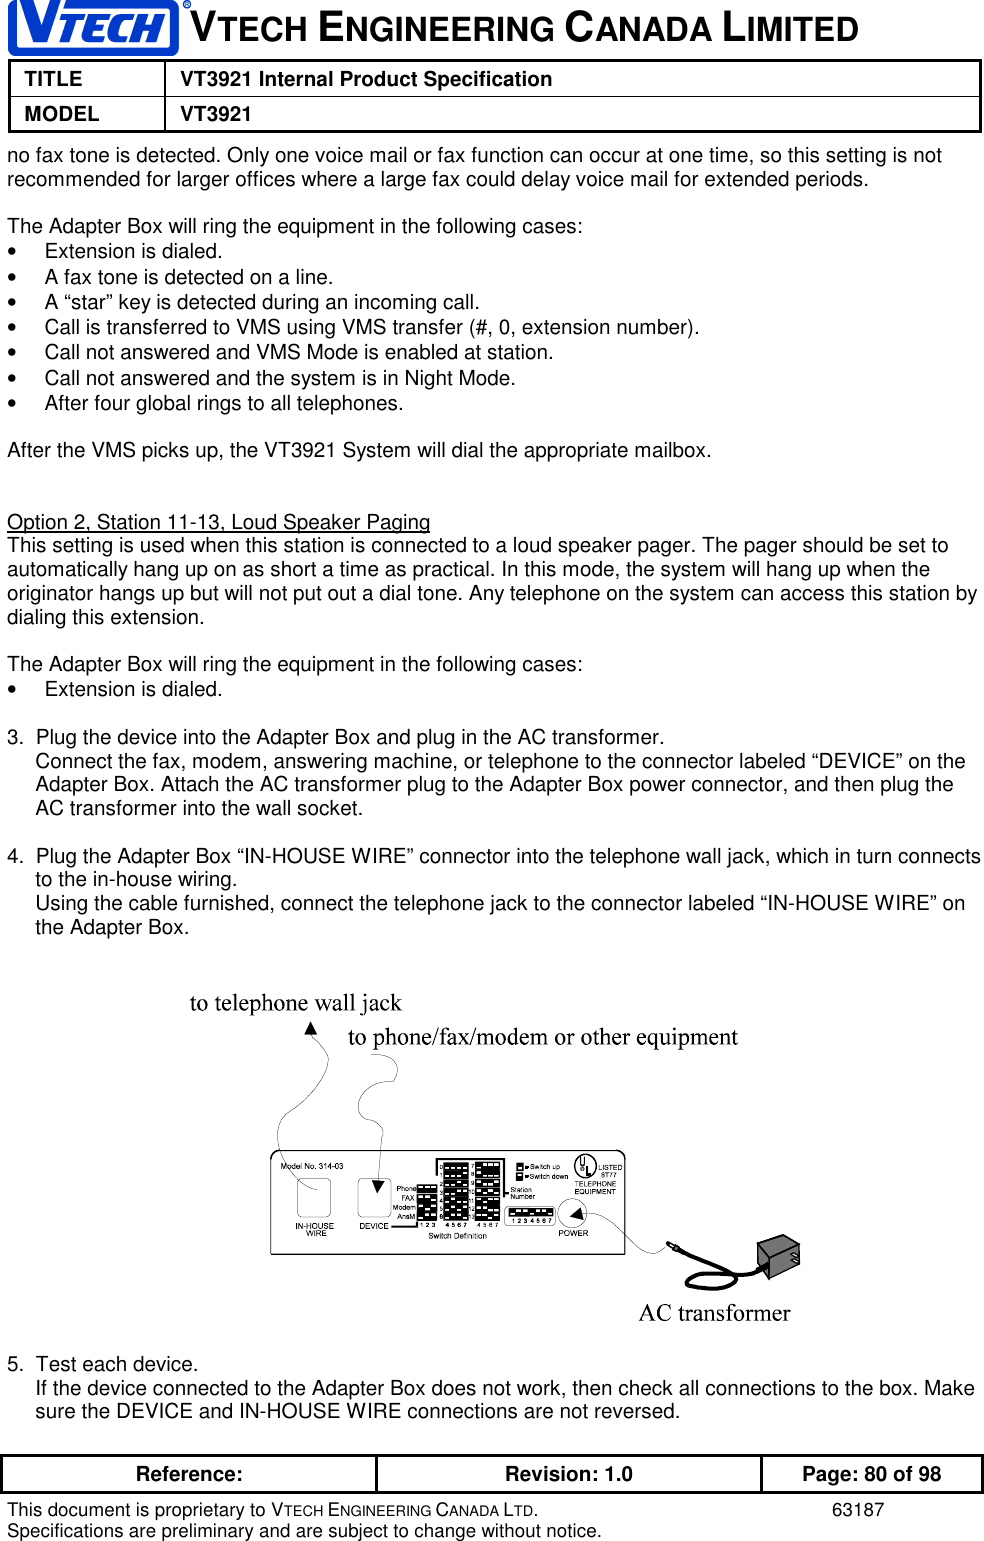 VTECH ENGINEERING CANADA LIMITEDTITLE VT3921 Internal Product SpecificationMODEL VT3921Reference: Revision: 1.0 Page: 80 of 98This document is proprietary to VTECH ENGINEERING CANADA LTD. 63187Specifications are preliminary and are subject to change without notice.no fax tone is detected. Only one voice mail or fax function can occur at one time, so this setting is notrecommended for larger offices where a large fax could delay voice mail for extended periods.The Adapter Box will ring the equipment in the following cases:•  Extension is dialed.•  A fax tone is detected on a line.•  A “star” key is detected during an incoming call.•  Call is transferred to VMS using VMS transfer (#, 0, extension number).•  Call not answered and VMS Mode is enabled at station.•  Call not answered and the system is in Night Mode.•  After four global rings to all telephones.After the VMS picks up, the VT3921 System will dial the appropriate mailbox.Option 2, Station 11-13, Loud Speaker PagingThis setting is used when this station is connected to a loud speaker pager. The pager should be set toautomatically hang up on as short a time as practical. In this mode, the system will hang up when theoriginator hangs up but will not put out a dial tone. Any telephone on the system can access this station bydialing this extension.The Adapter Box will ring the equipment in the following cases:•  Extension is dialed.3.  Plug the device into the Adapter Box and plug in the AC transformer.Connect the fax, modem, answering machine, or telephone to the connector labeled “DEVICE” on theAdapter Box. Attach the AC transformer plug to the Adapter Box power connector, and then plug theAC transformer into the wall socket.4.  Plug the Adapter Box “IN-HOUSE WIRE” connector into the telephone wall jack, which in turn connectsto the in-house wiring.Using the cable furnished, connect the telephone jack to the connector labeled “IN-HOUSE WIRE” onthe Adapter Box.5.  Test each device.If the device connected to the Adapter Box does not work, then check all connections to the box. Makesure the DEVICE and IN-HOUSE WIRE connections are not reversed.